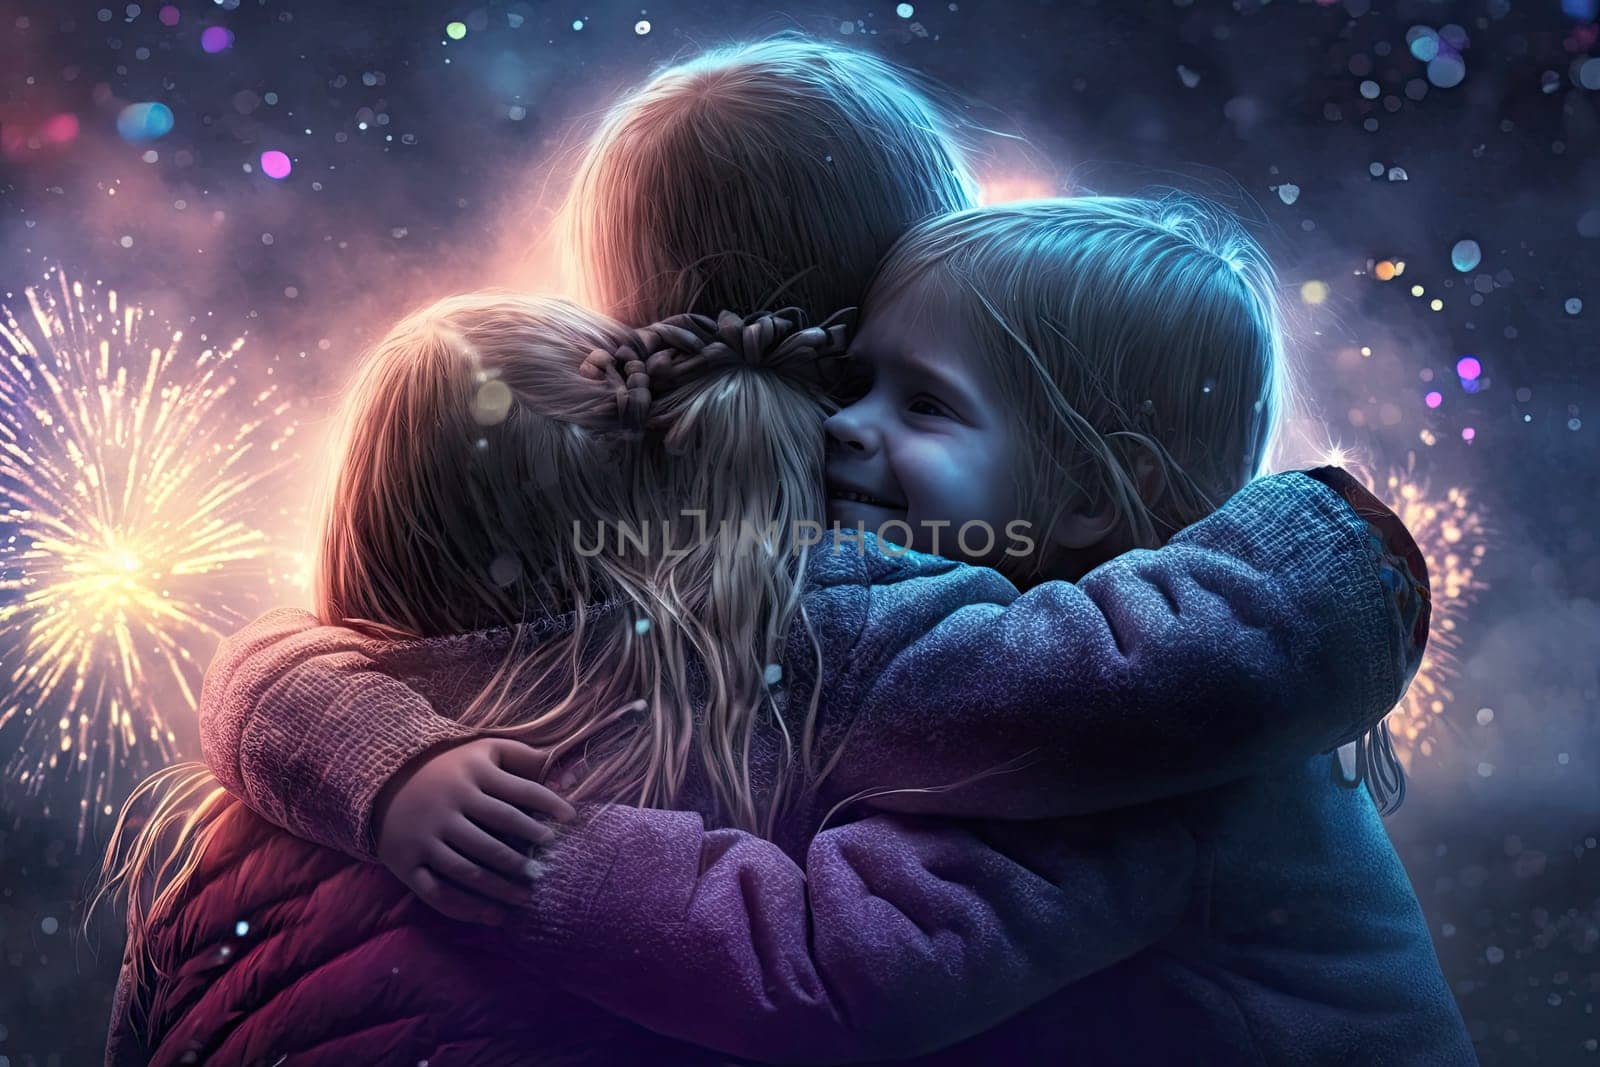 hugging happiness kids student group while fireworks coloring the sky by biancoblue